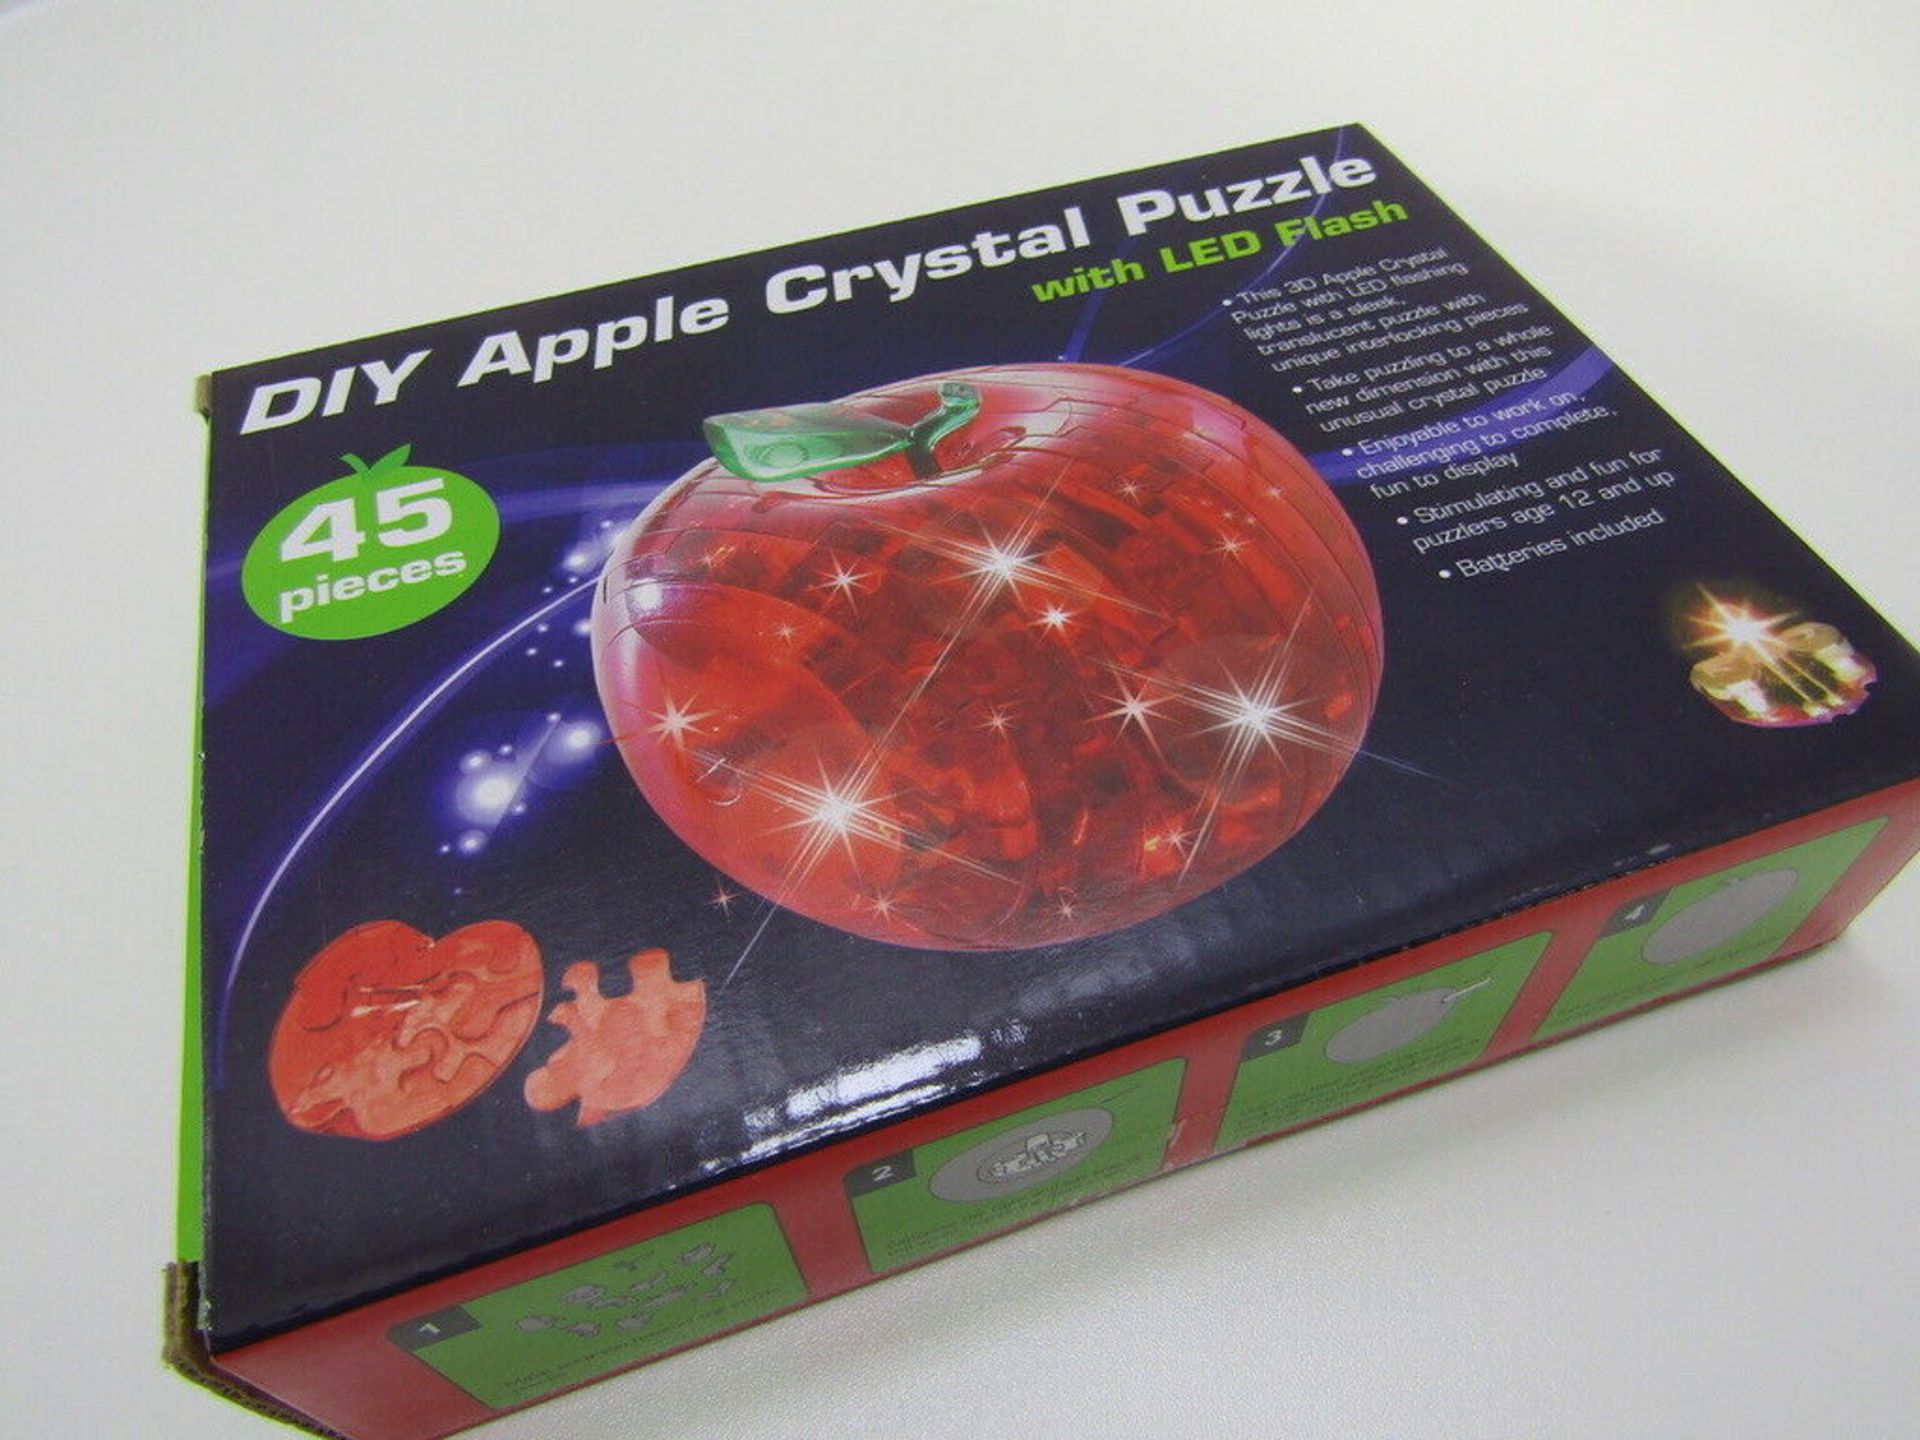 8 x 3D Jigsaw Puzzle. Red Apple with Flashing LED Lights. incs. Batteries.